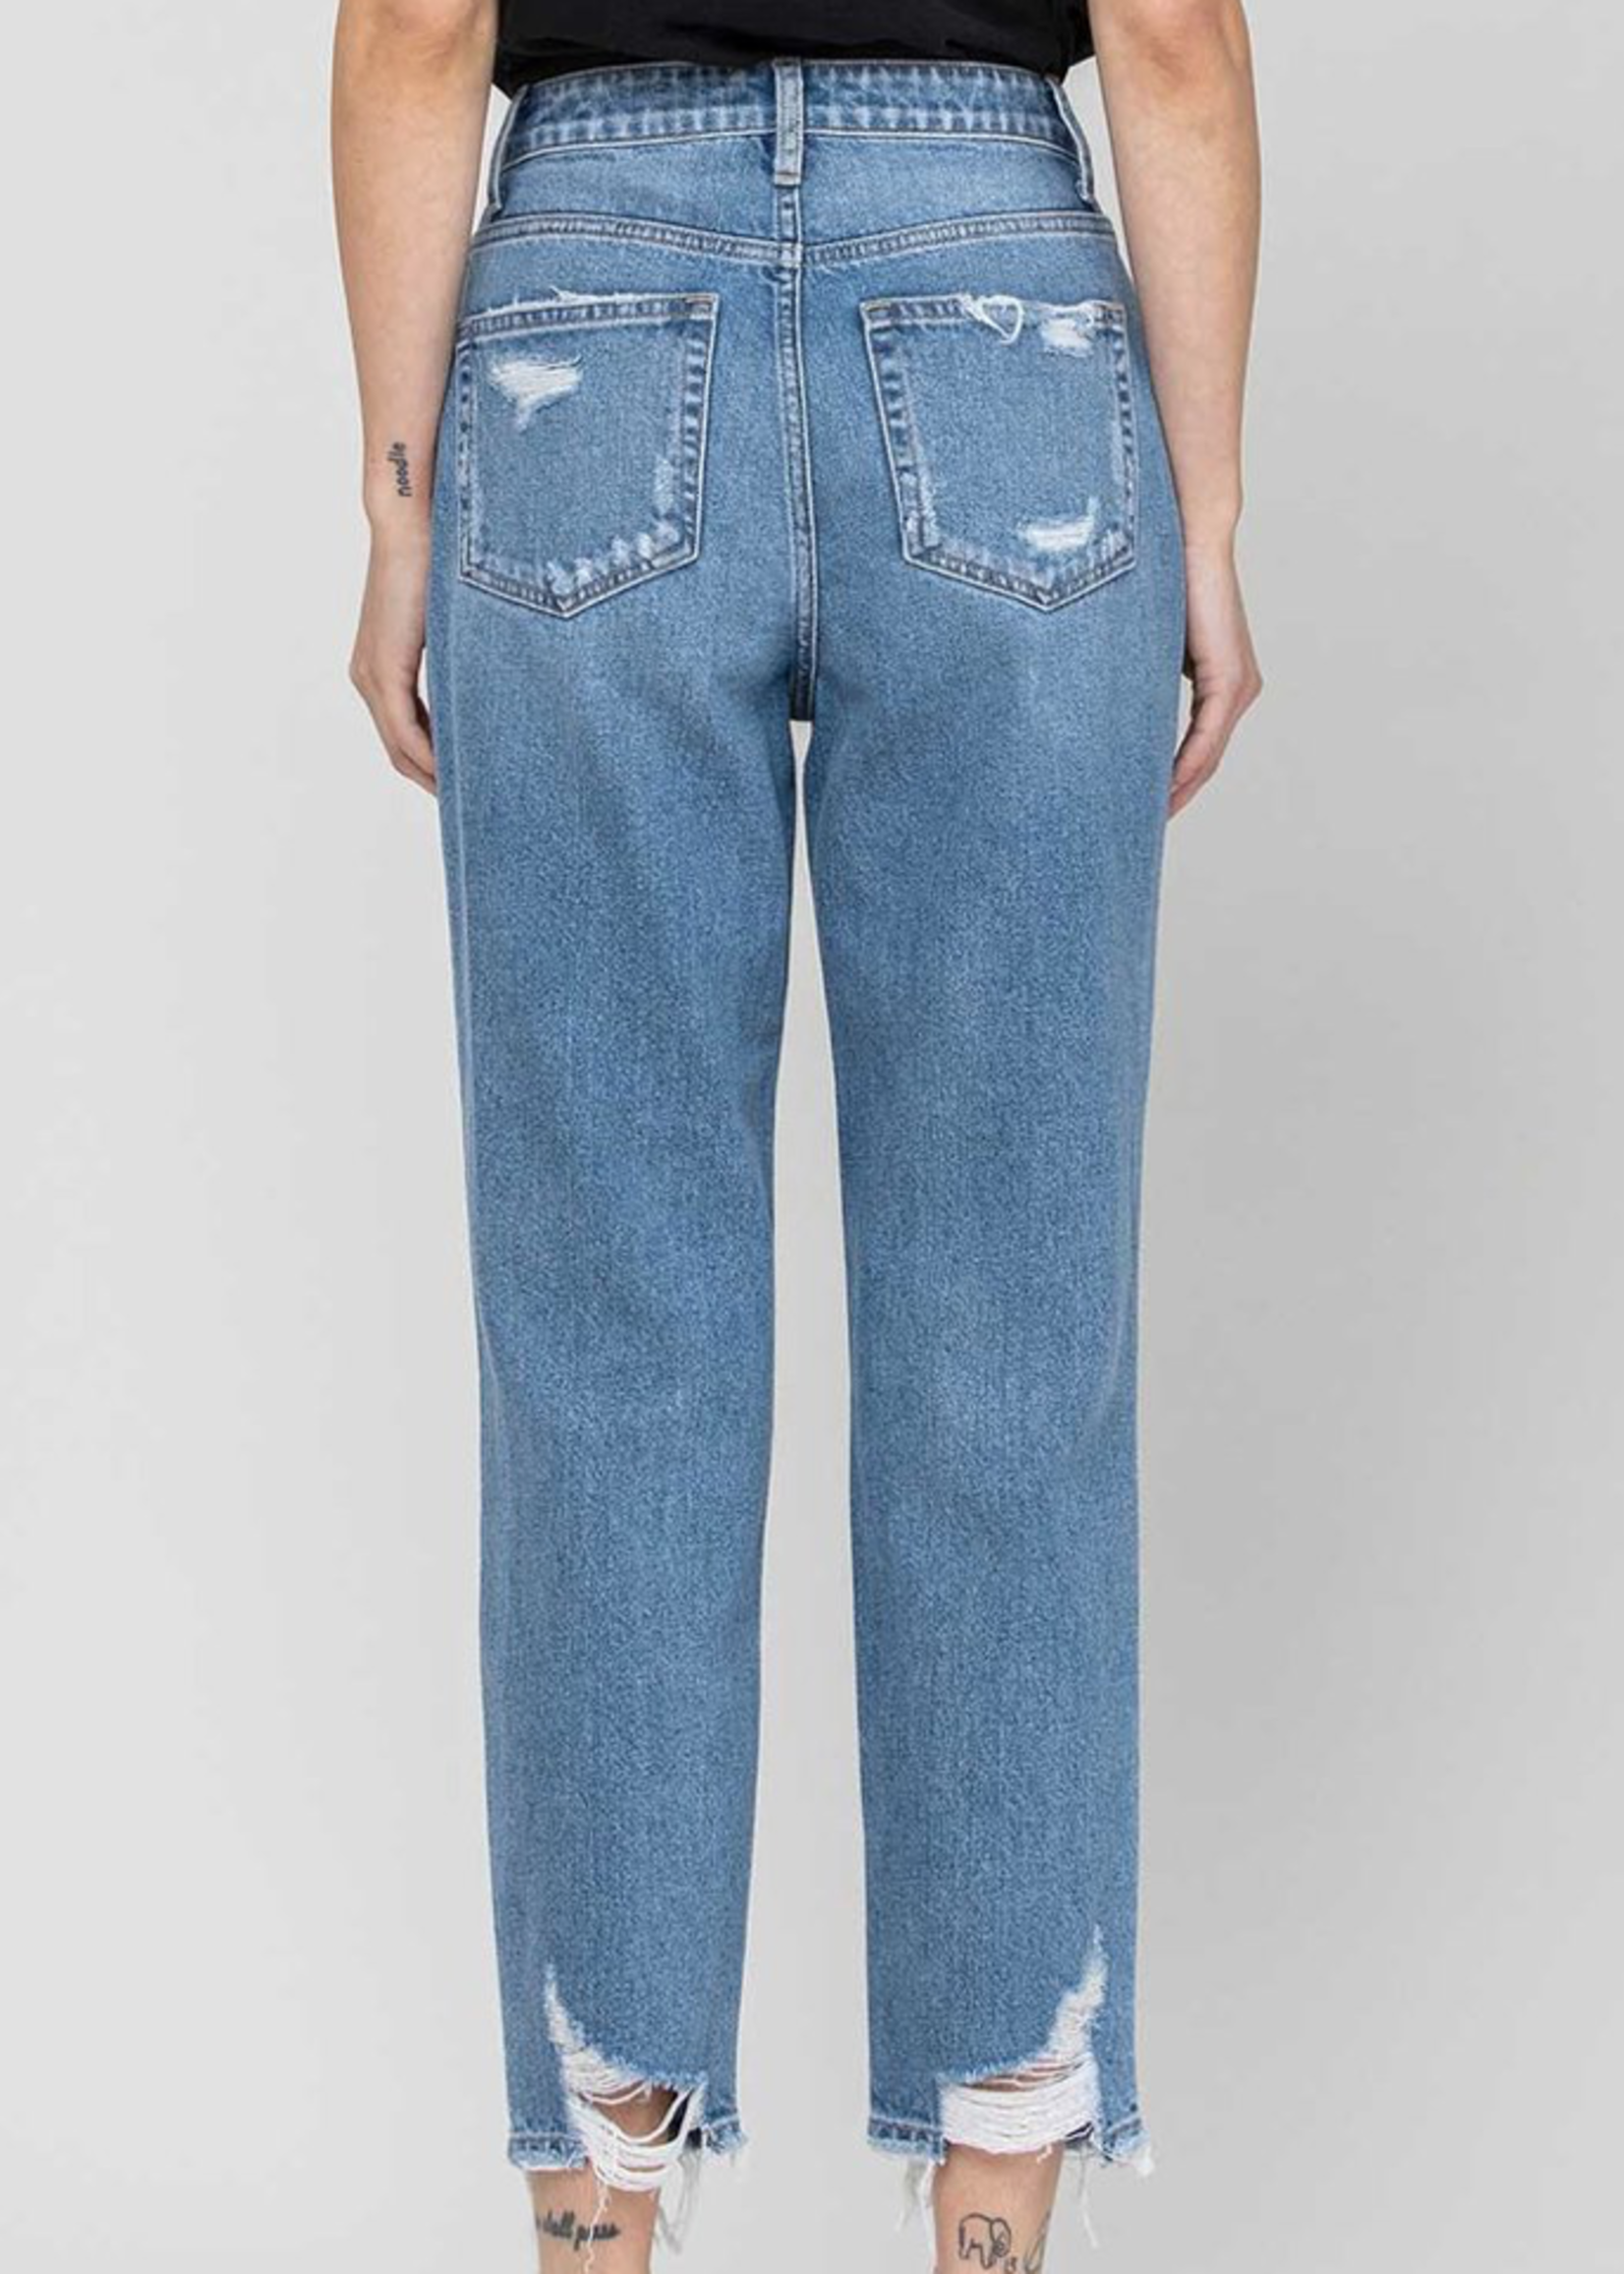 Flying Monkey Distressed Mom Jeans